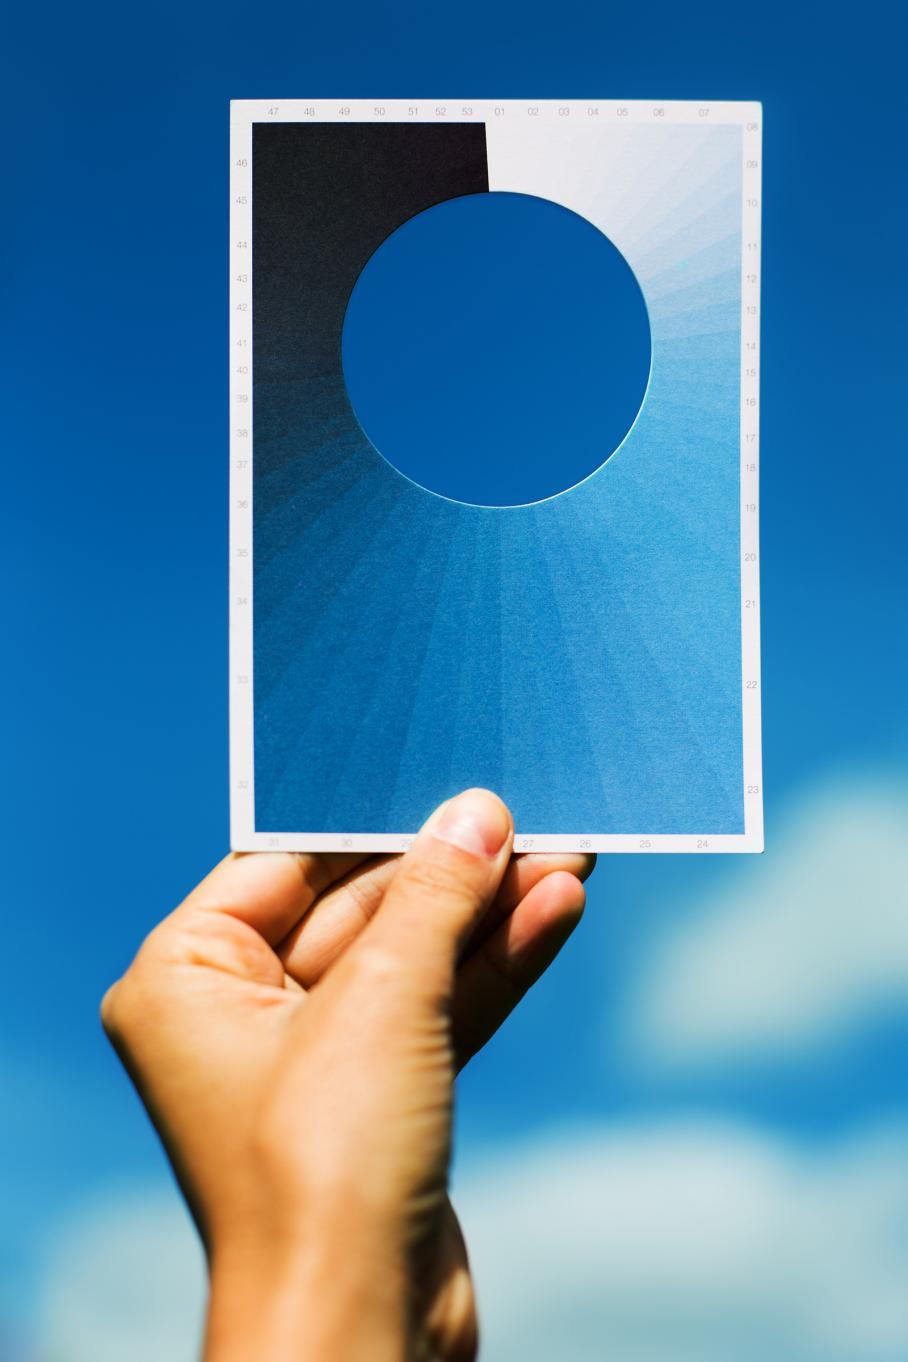 A hand holding a postcard against a blue sky. The postcard contains a spectrum of blue hues and has a circular die cut near the top.